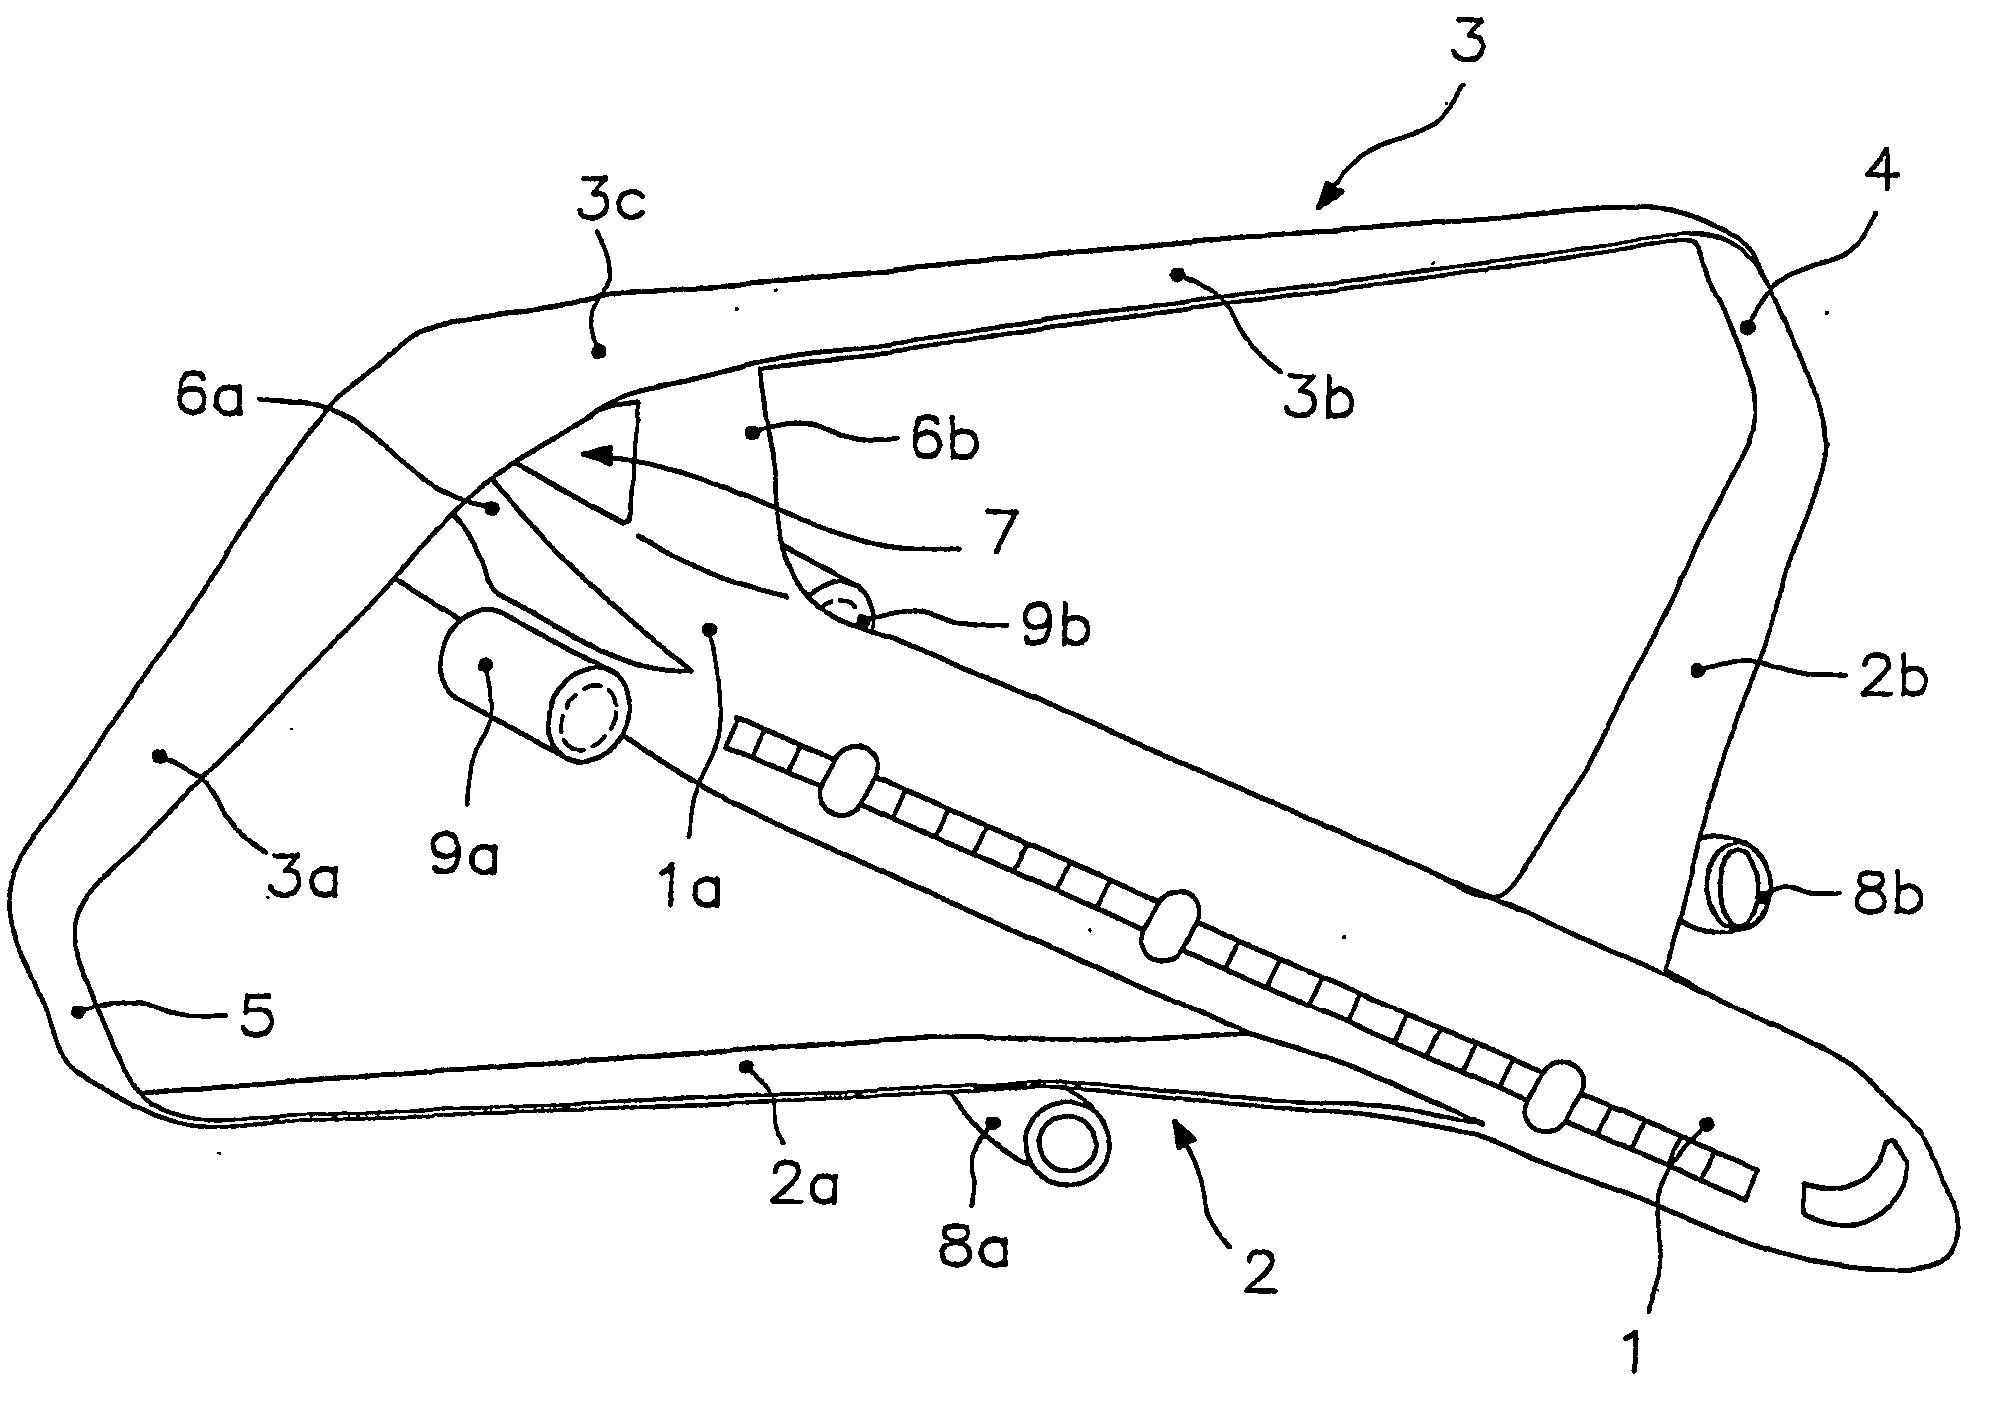 Swept-wing box-type aircraft with high fligh static stability